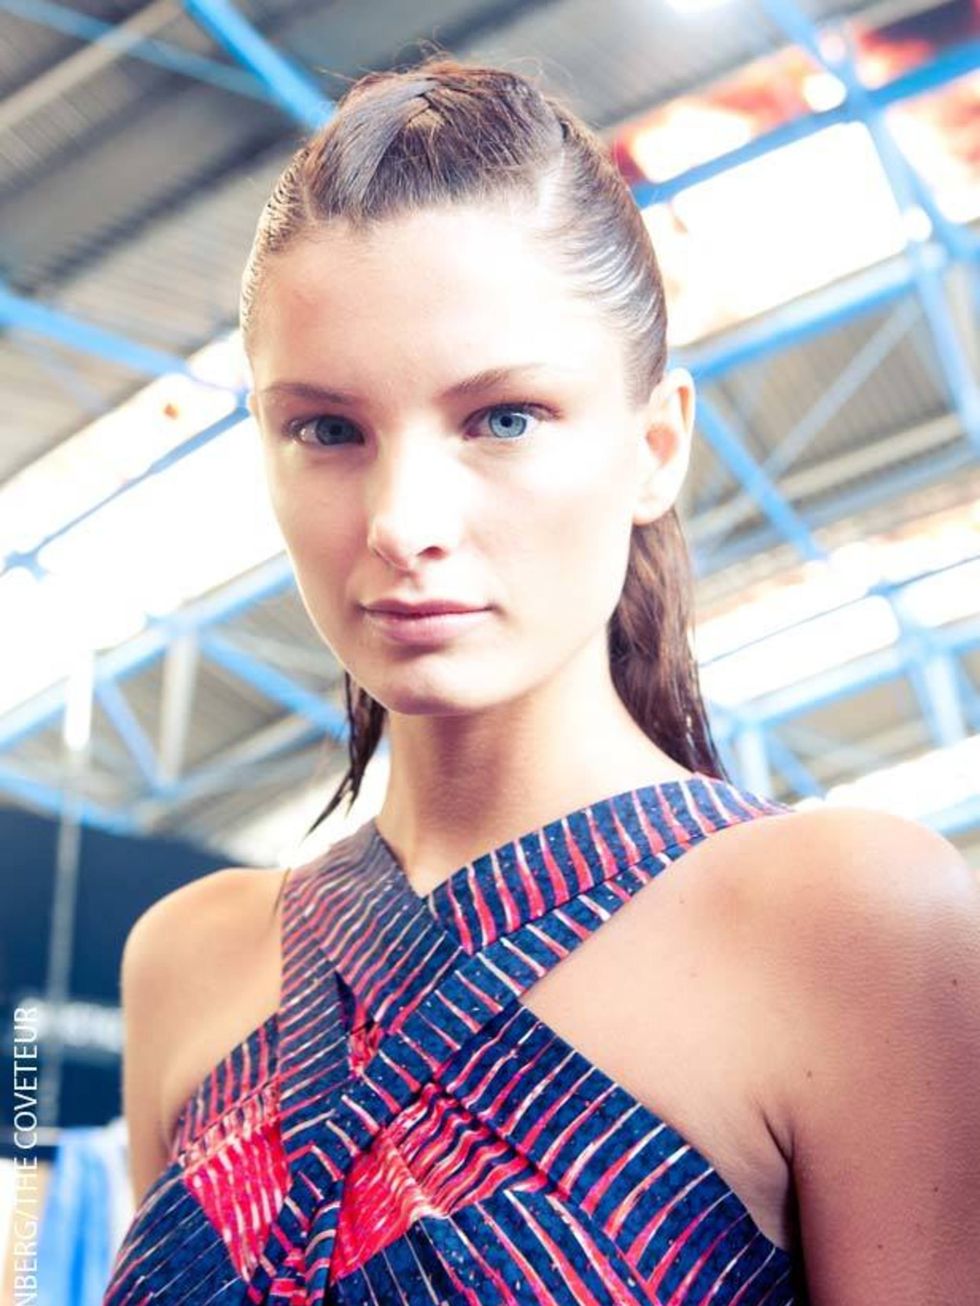 <p>A model backstage at <a href="http://www.elleuk.com/catwalk/collections/peter-pilotto/">Peter Pilottos S/S 12 show</a></p>